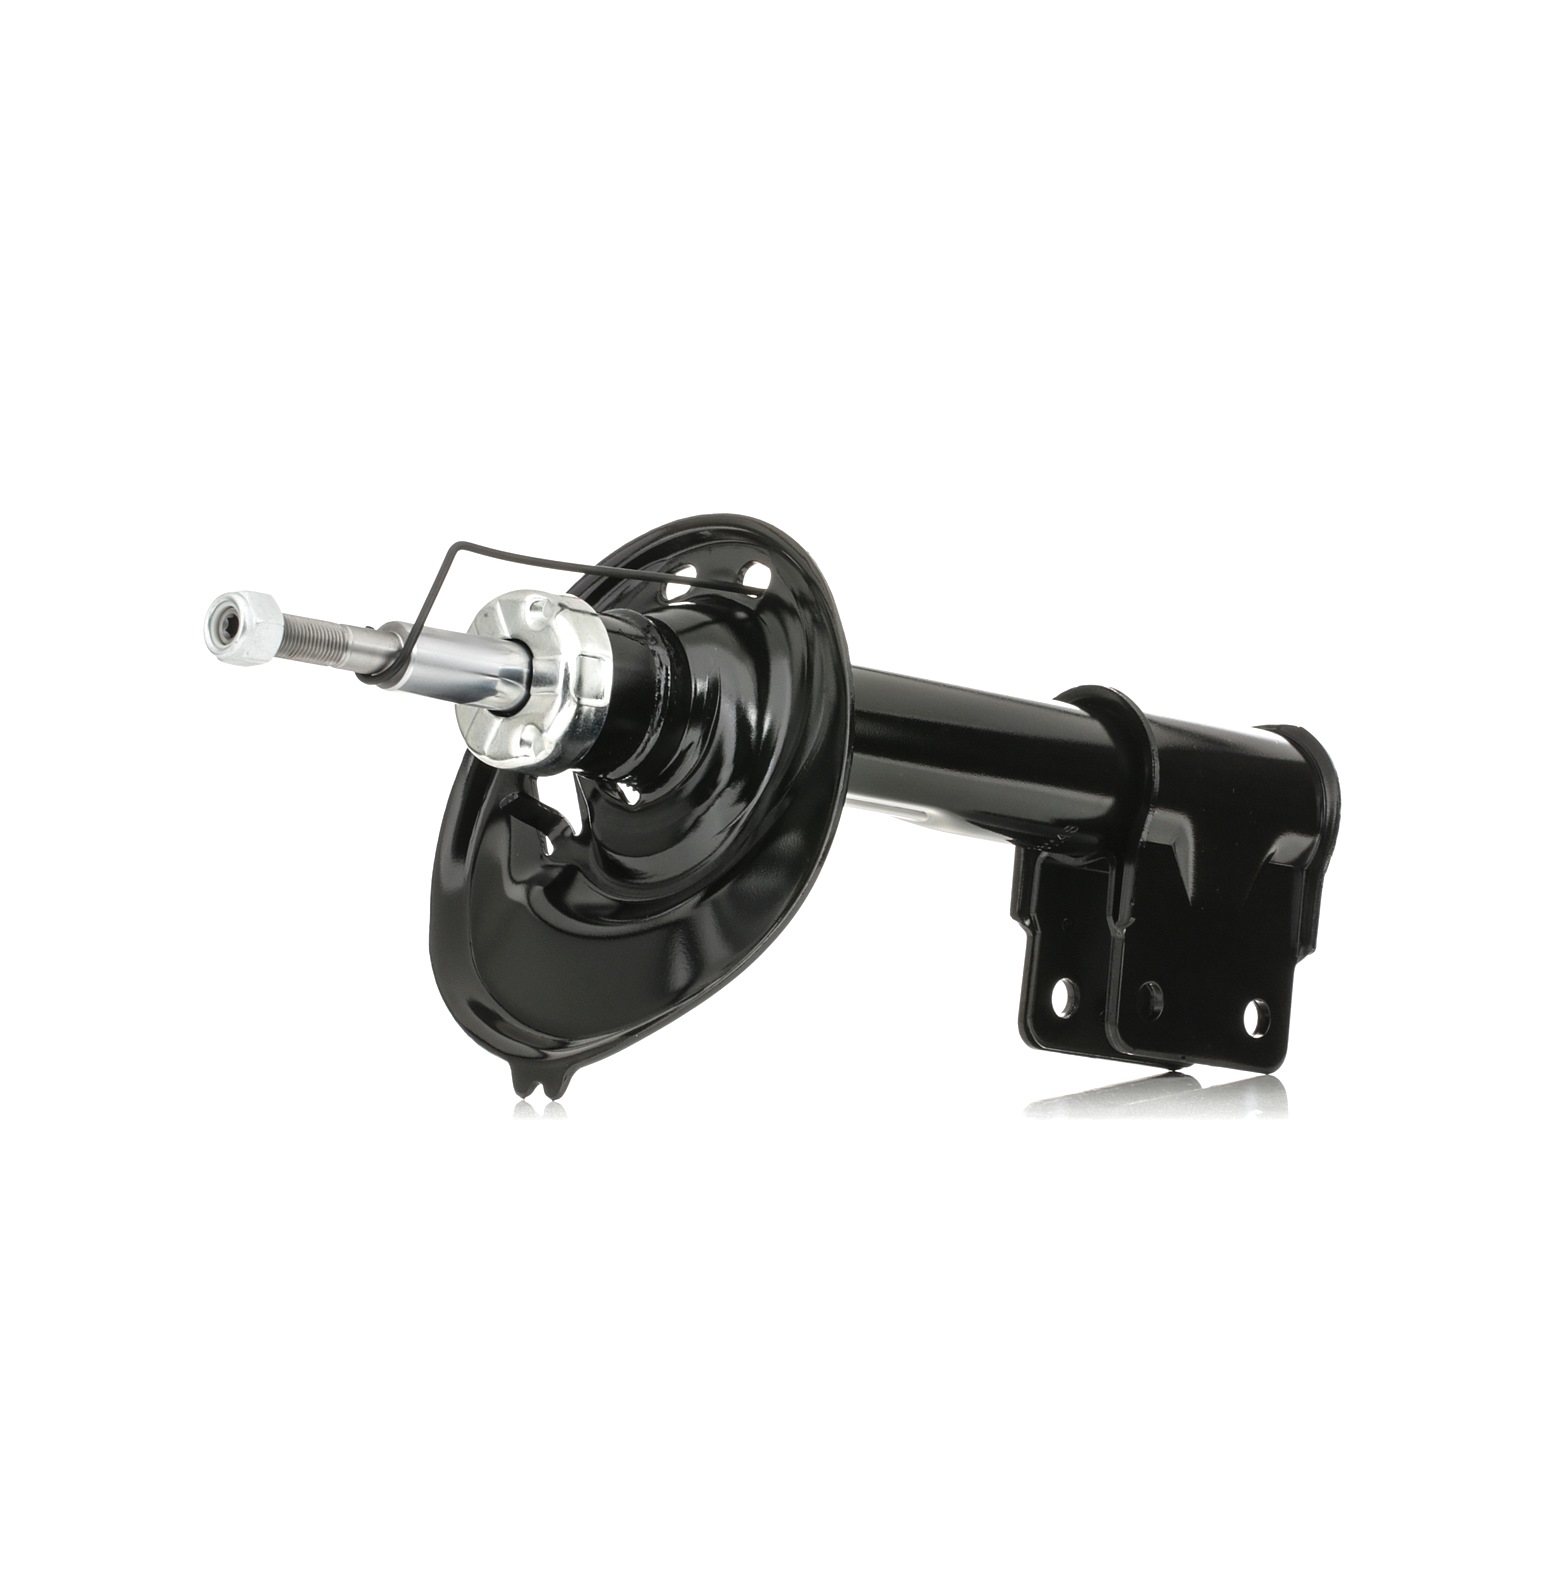 STARK SKSA-0132894 Shock absorber Front Axle Right, Gas Pressure, 514x337 mm, Twin-Tube, Suspension Strut, Damper with Rebound Spring, Top pin, Bottom Clamp